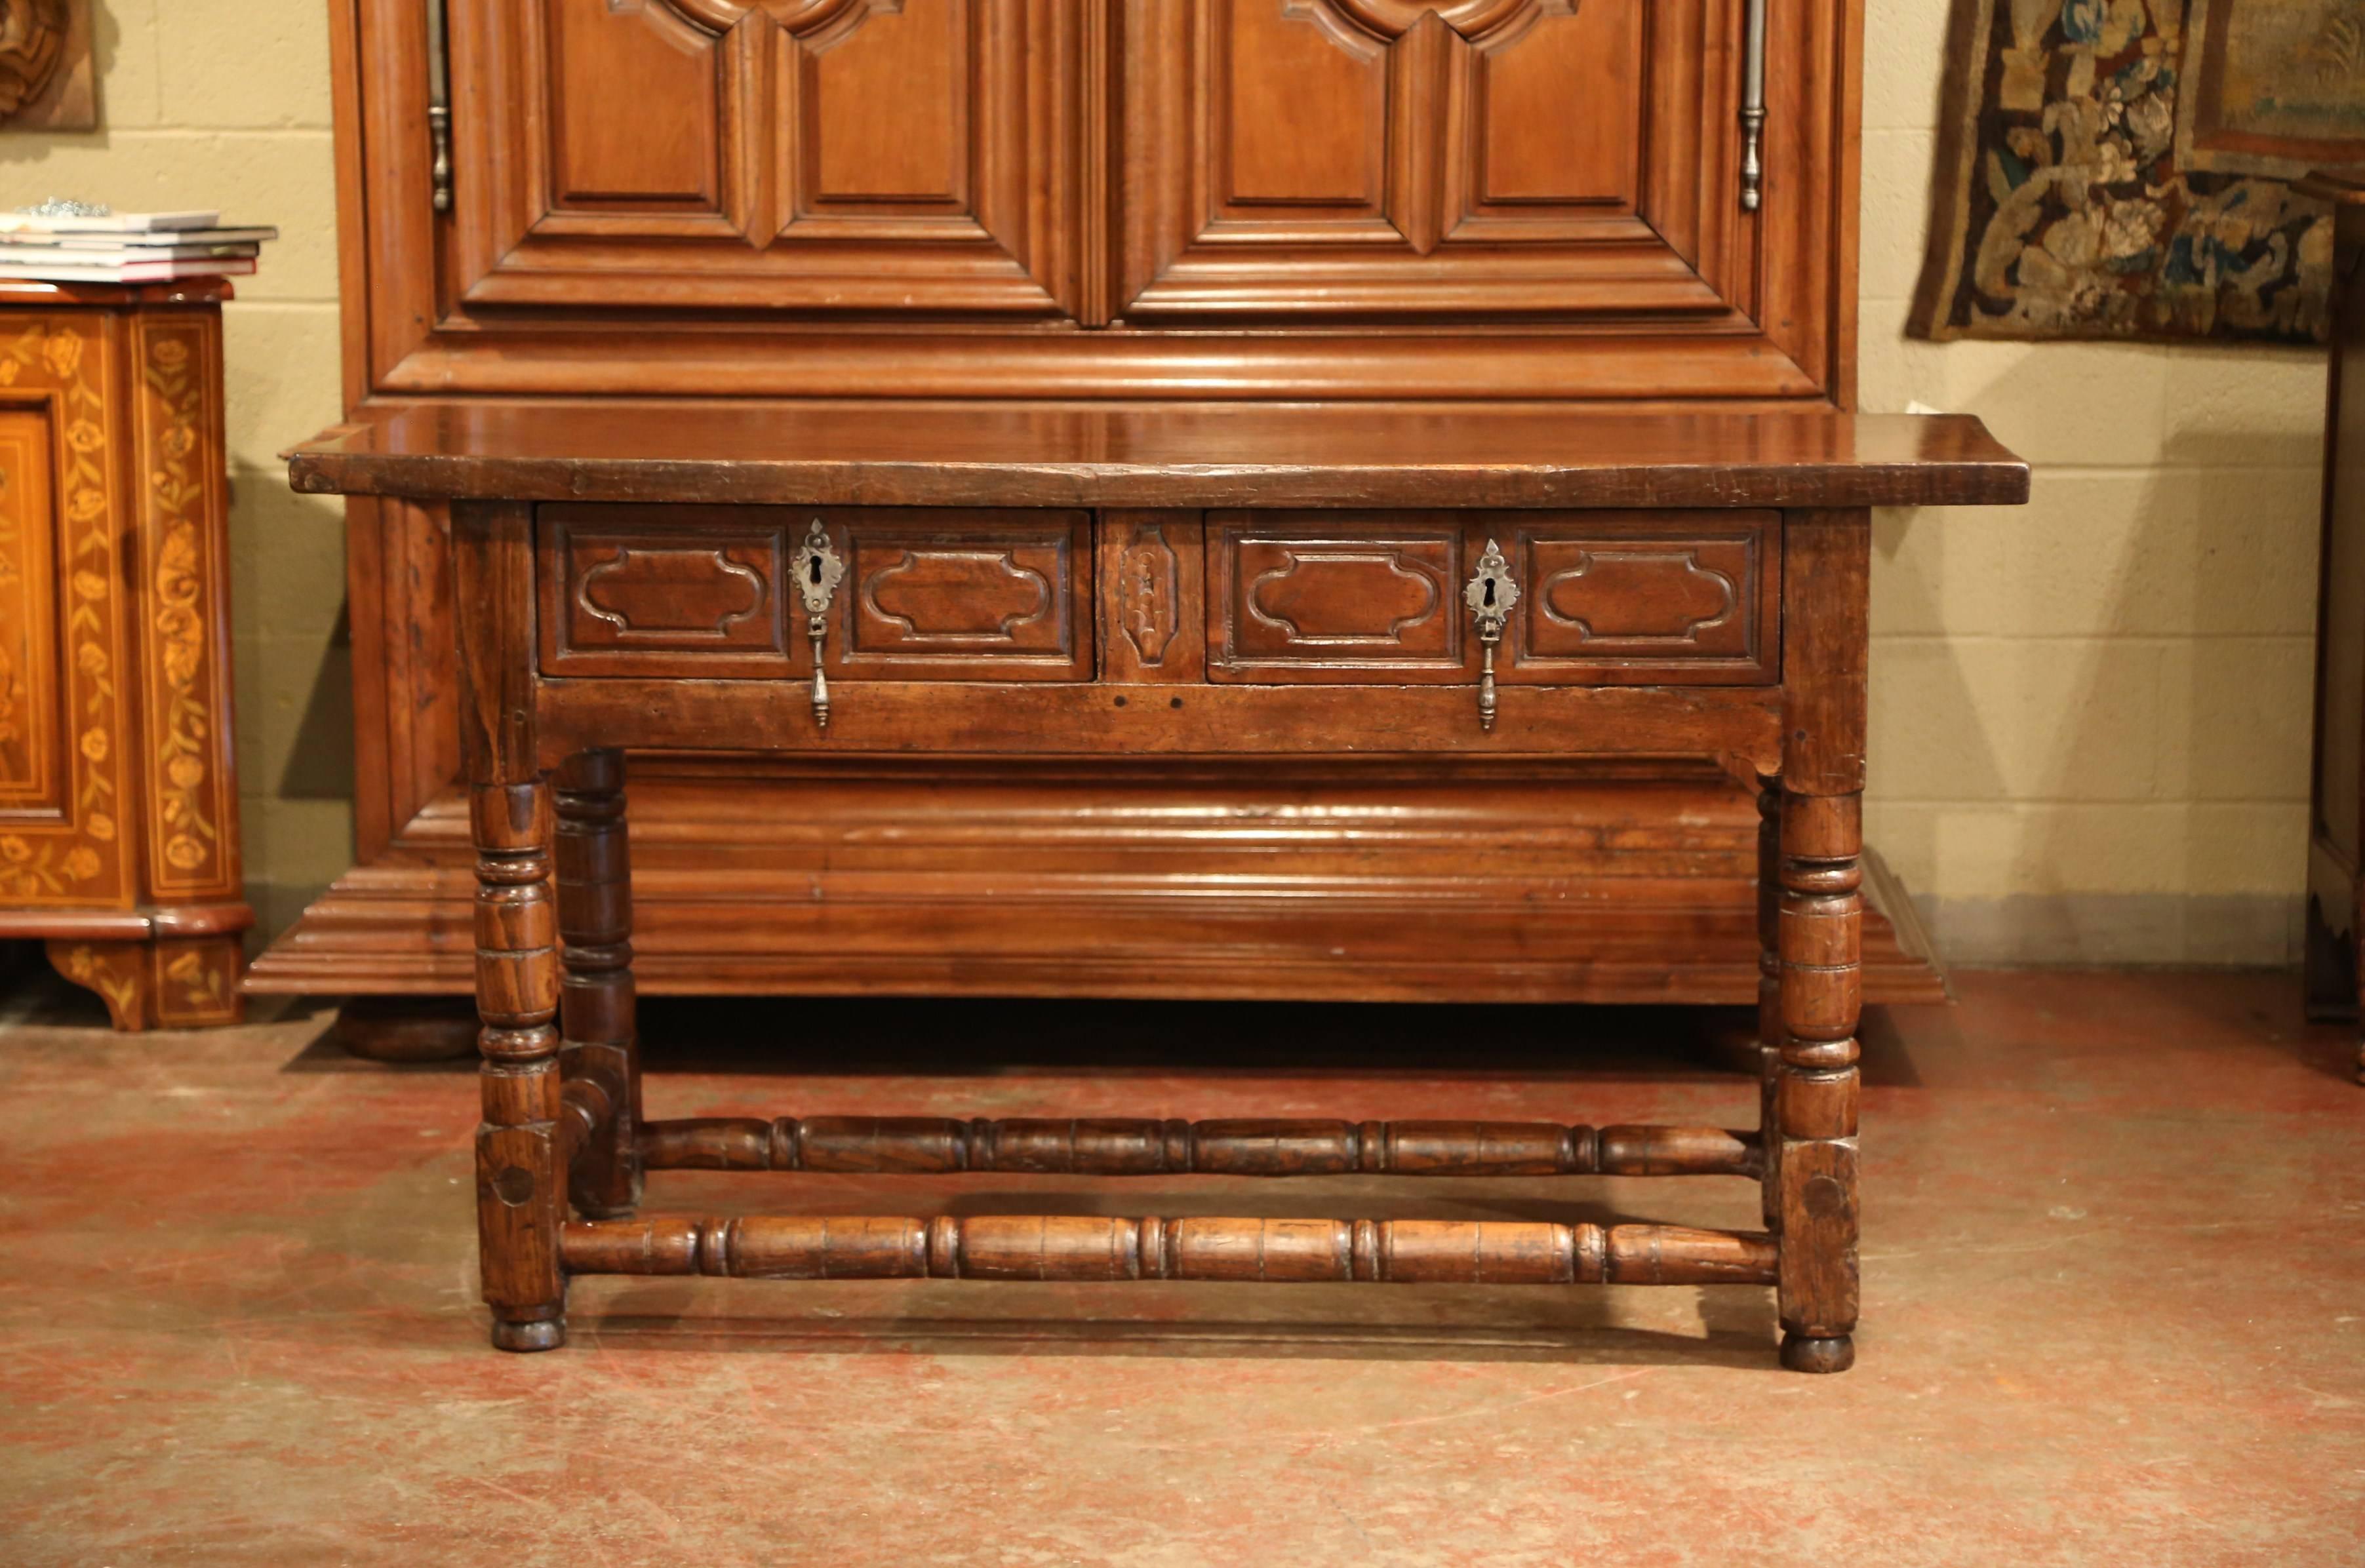 This elegant antique fruit wood console was crafted in Spain, circa 1780. The sofa table with four turned legs and matching stretcher at the base, features a pair carved drawers across the front embellished with original iron pull hardware. The top